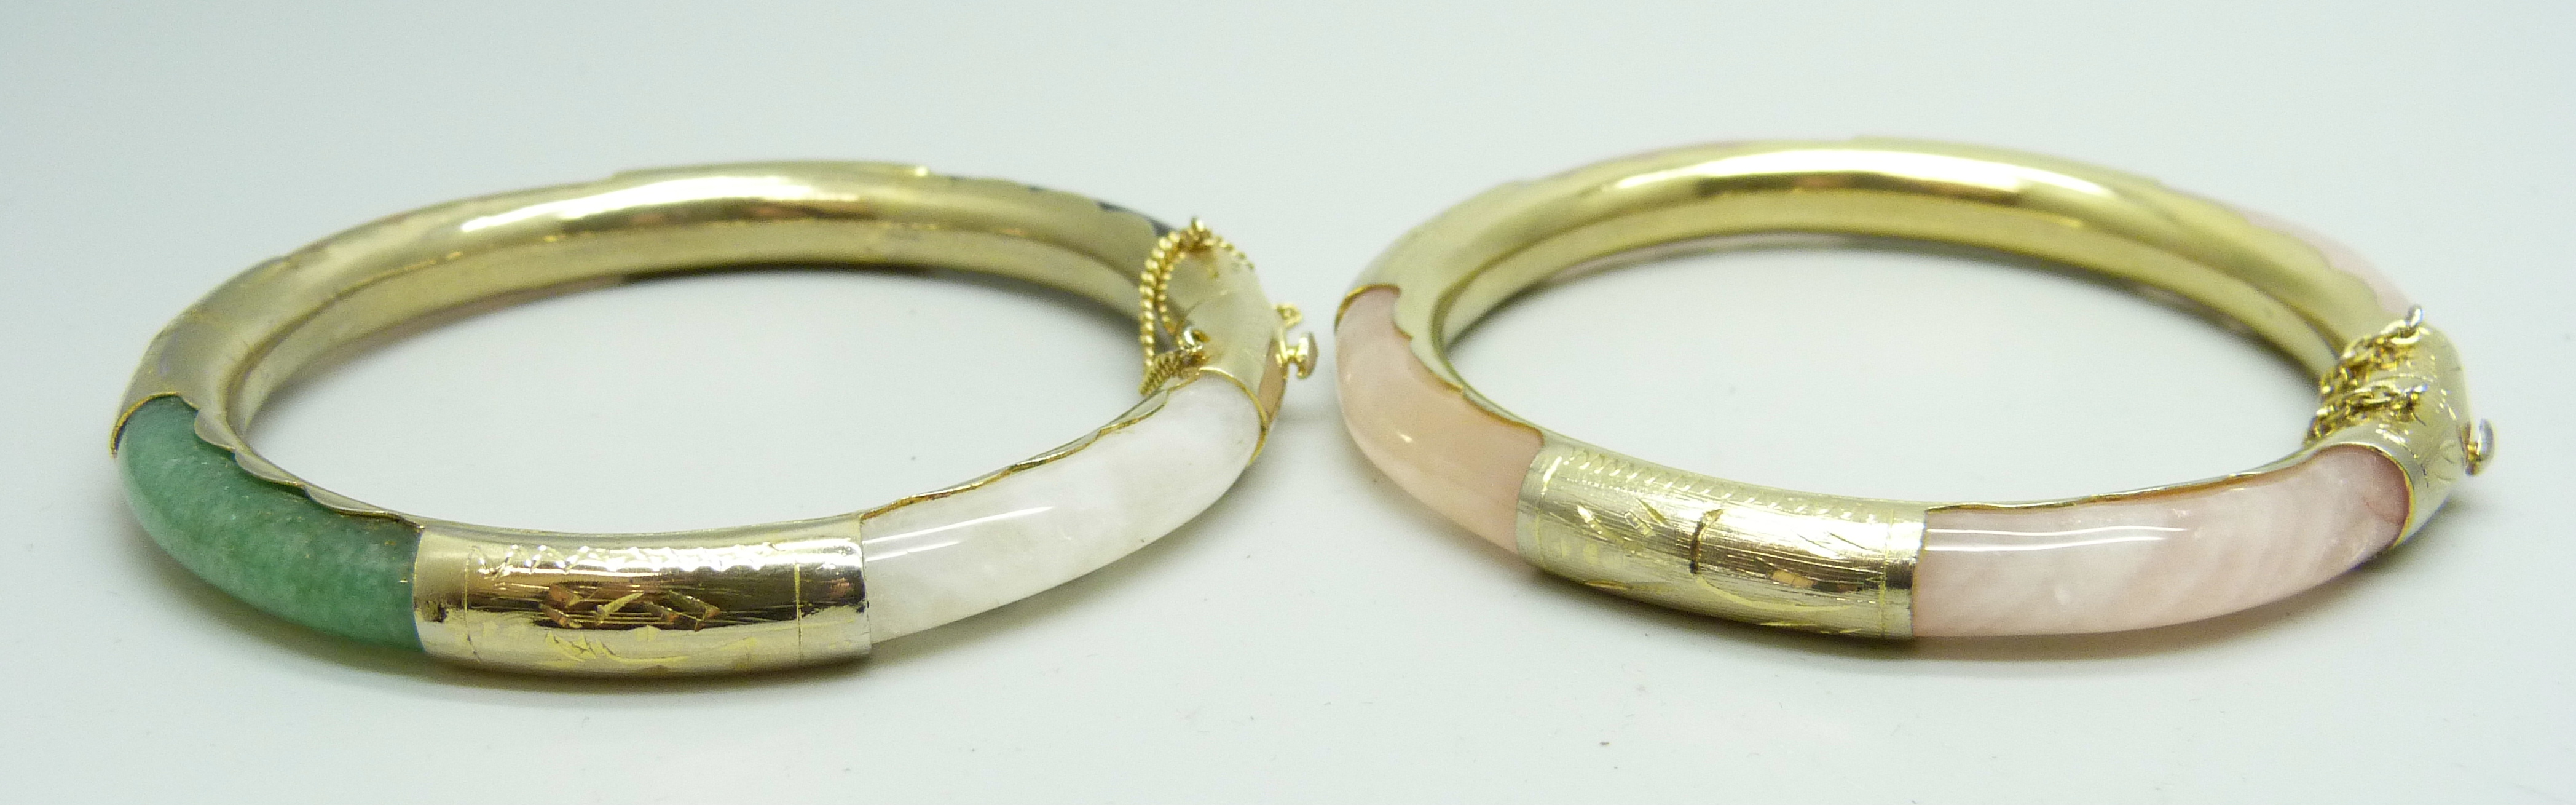 Two silver and jade bangles - Image 2 of 4